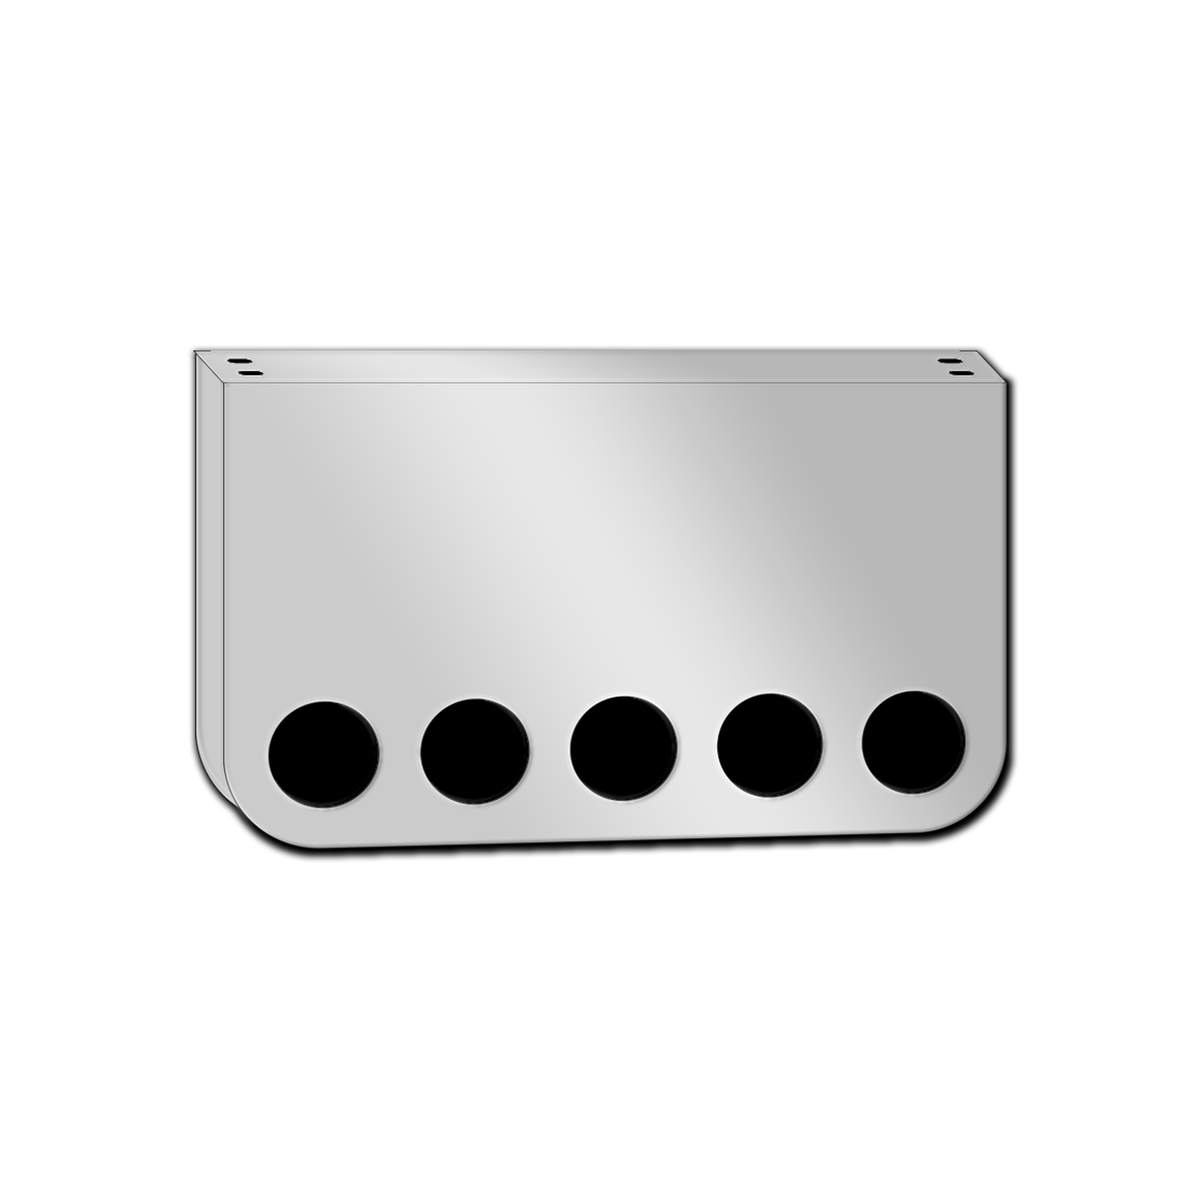 Rear Center Panel 20 Inch RC Style Stainless Steel  W/ 5 - 4 Inch On Front And  W/ 2 - 4 Inch Light Holes Cutouts On The Back | Universal Fit | Lighs Not Included